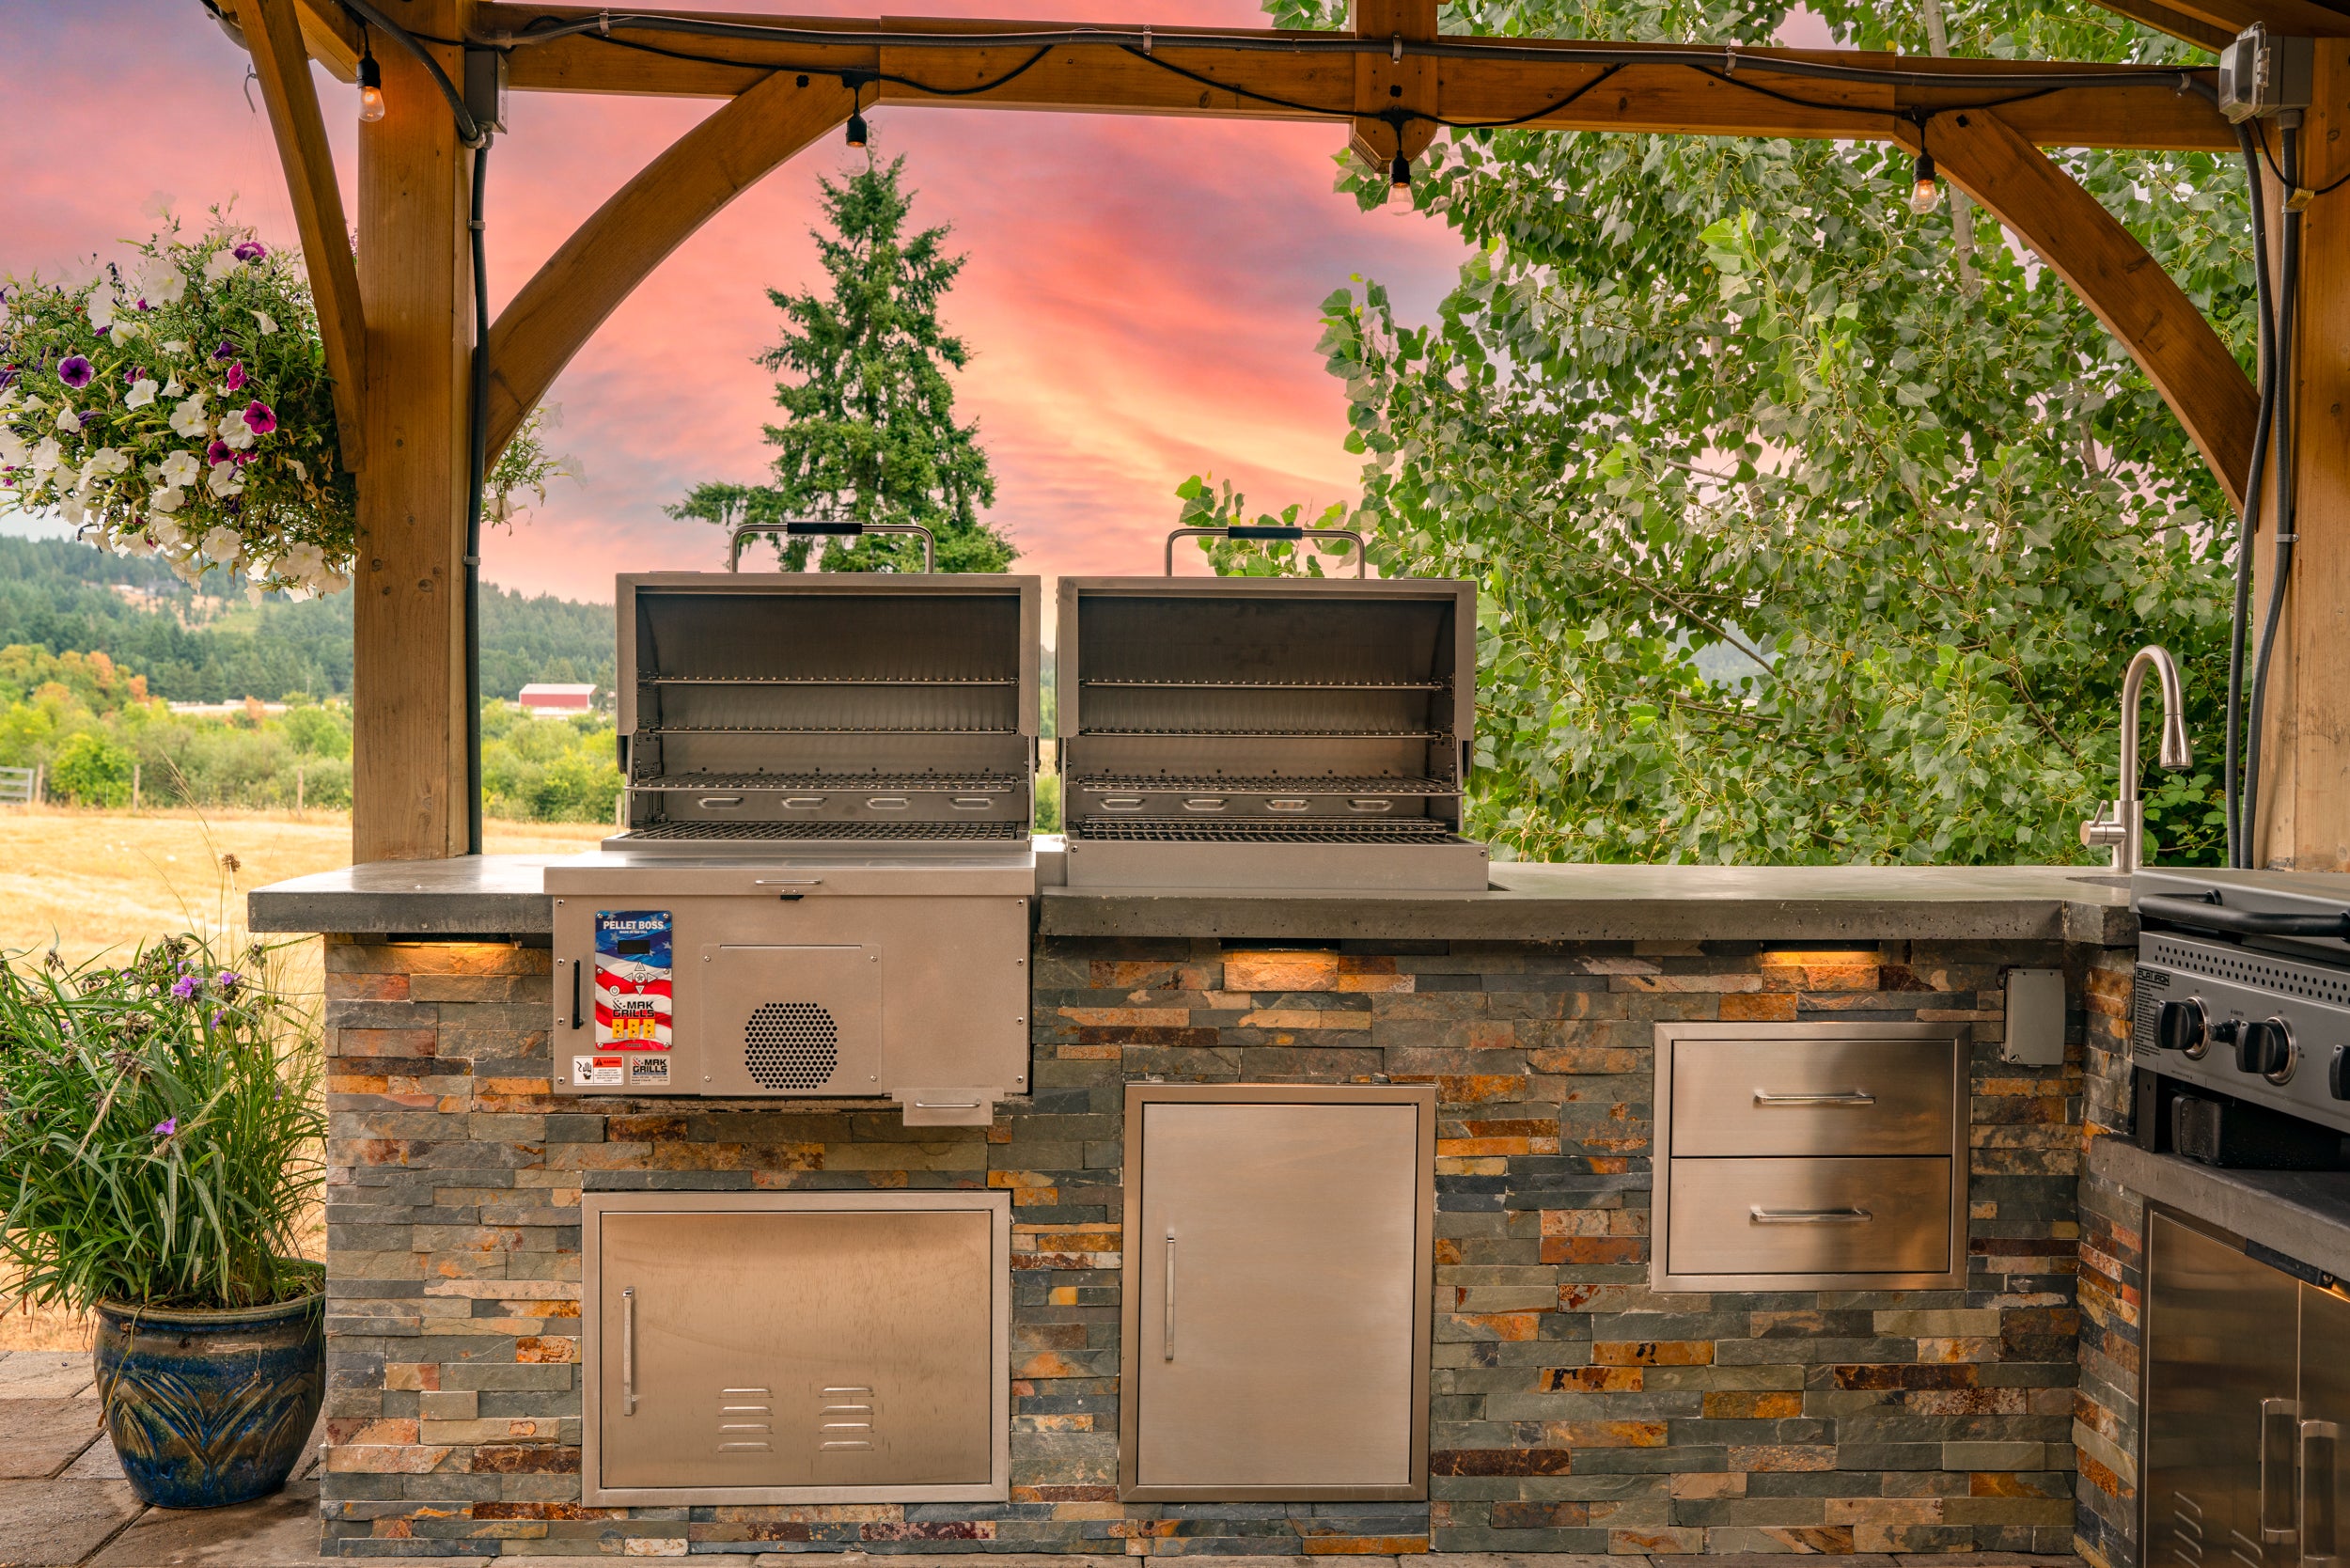 Outdoor kitchen with an open MAK Grills pellet smoker and grill, showcasing the grilling area with stainless steel grates, set against a backdrop of trees.